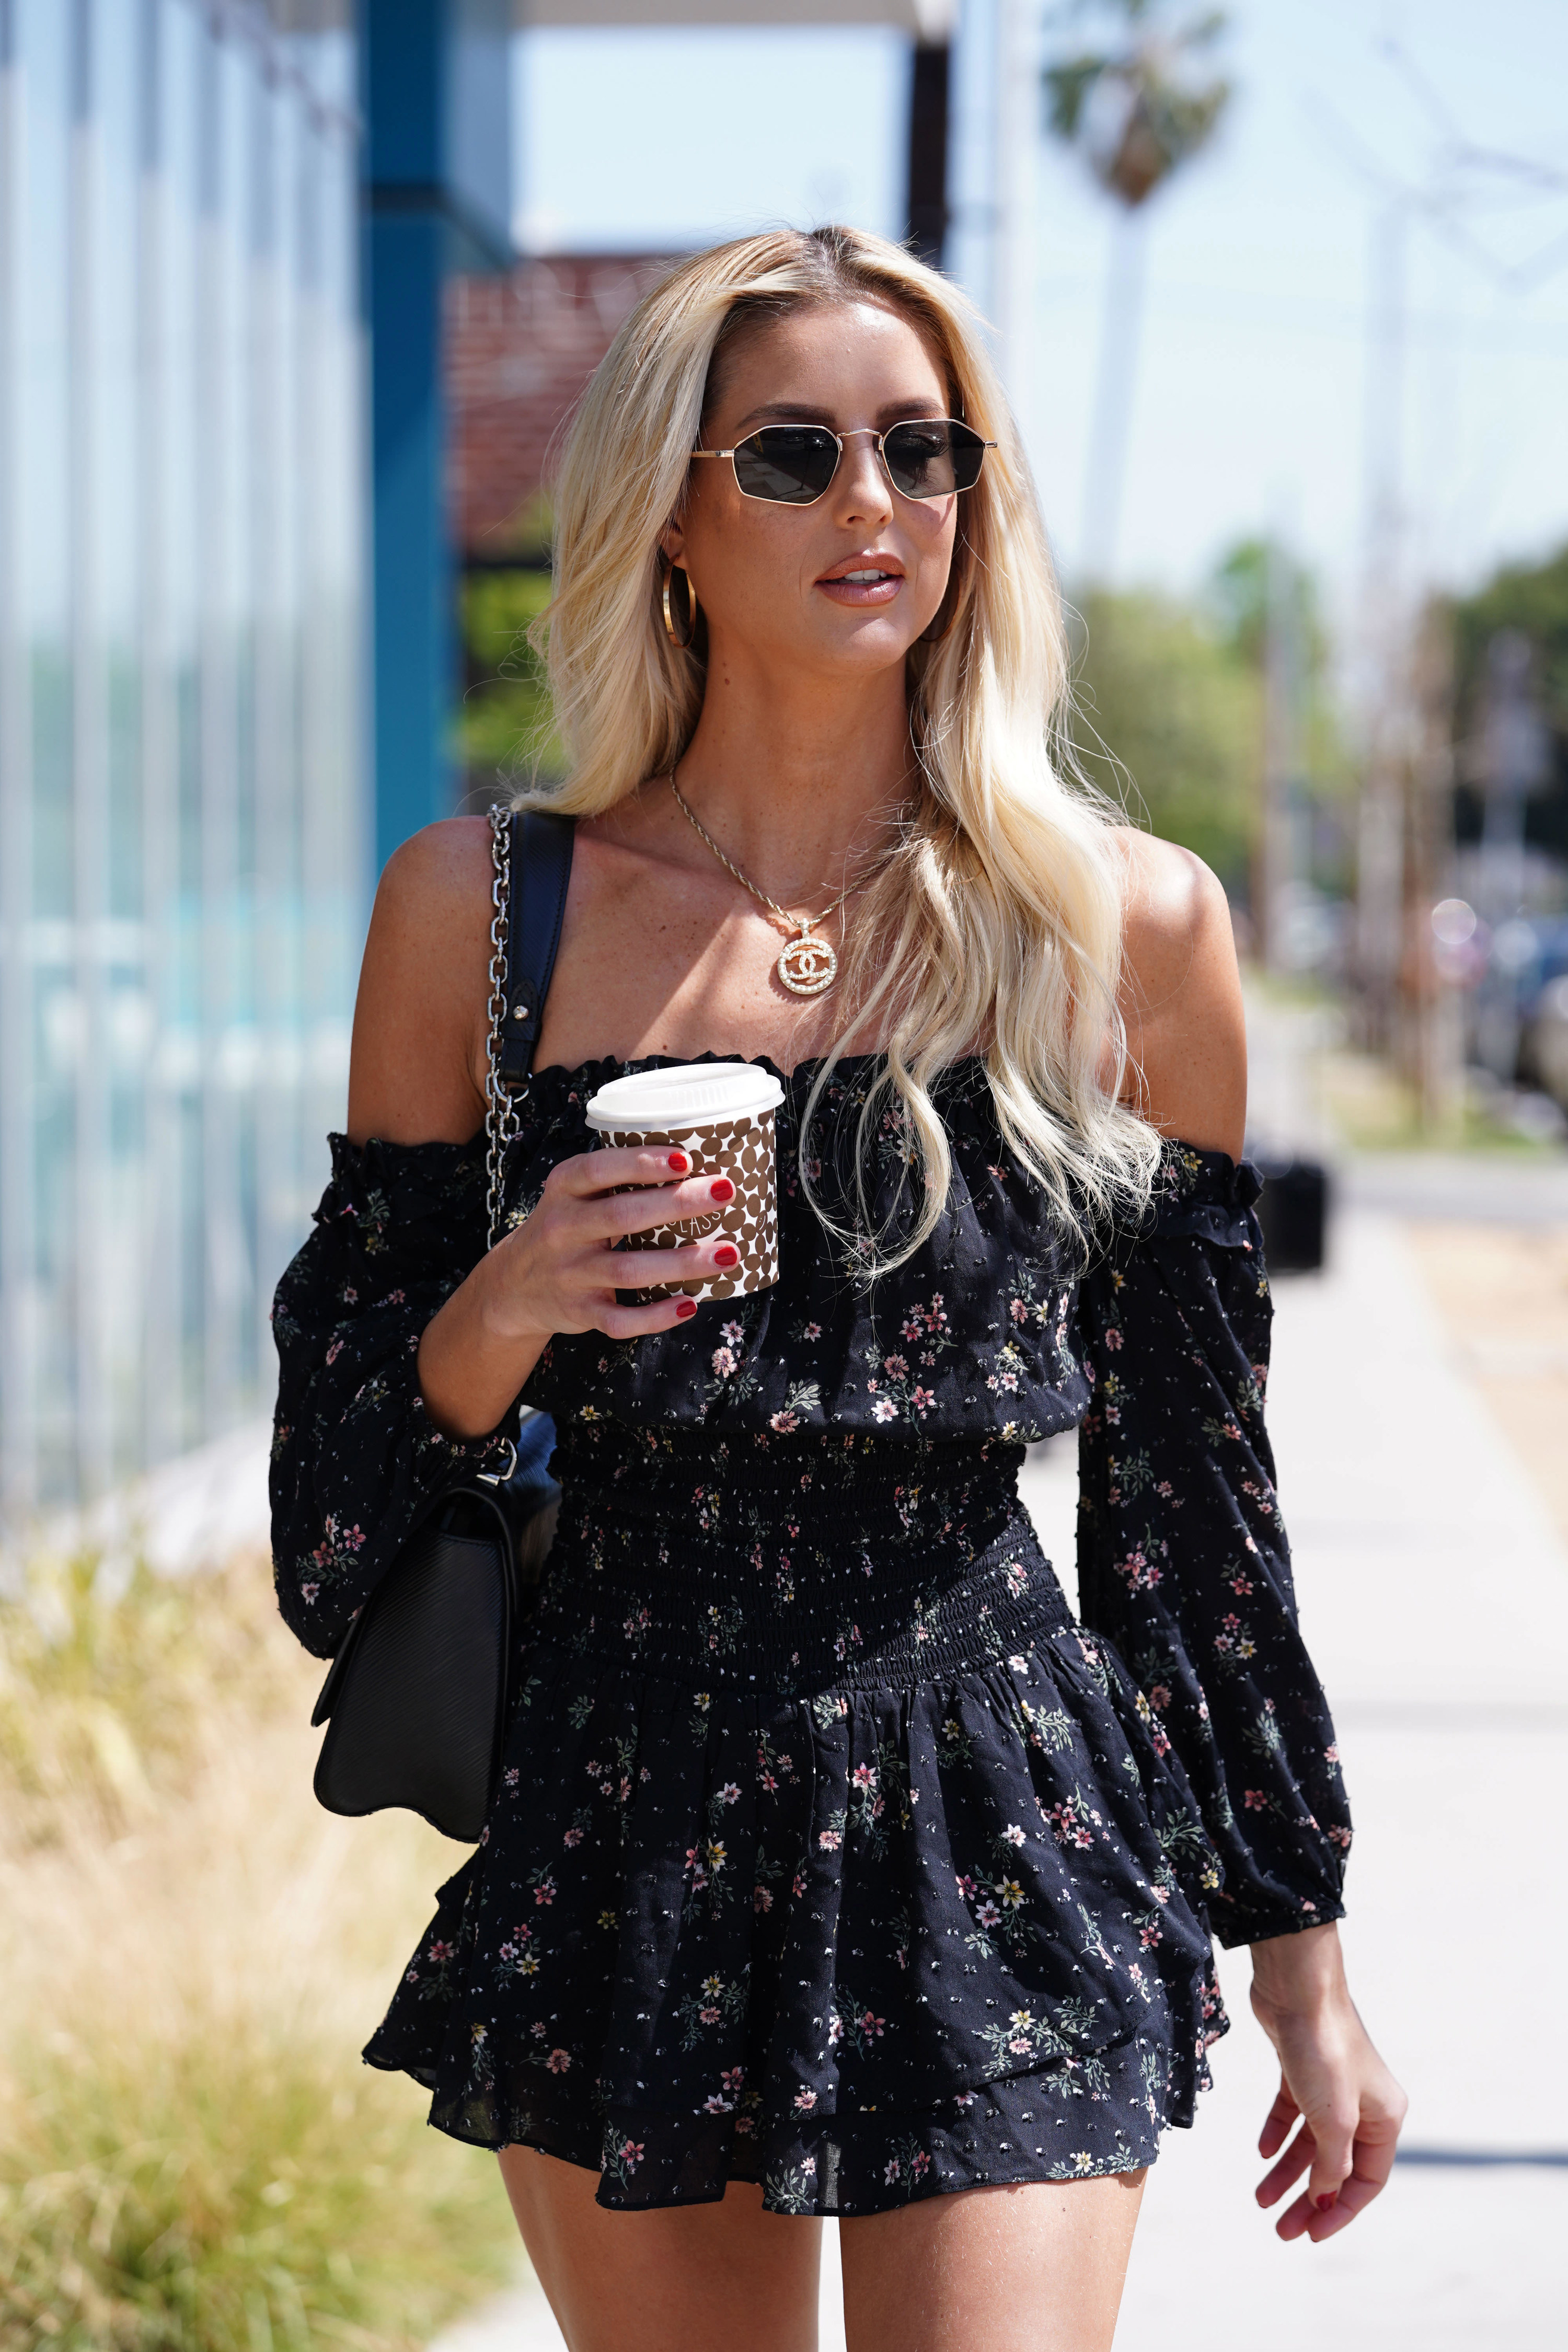 Emma walks down the street while holding coffee